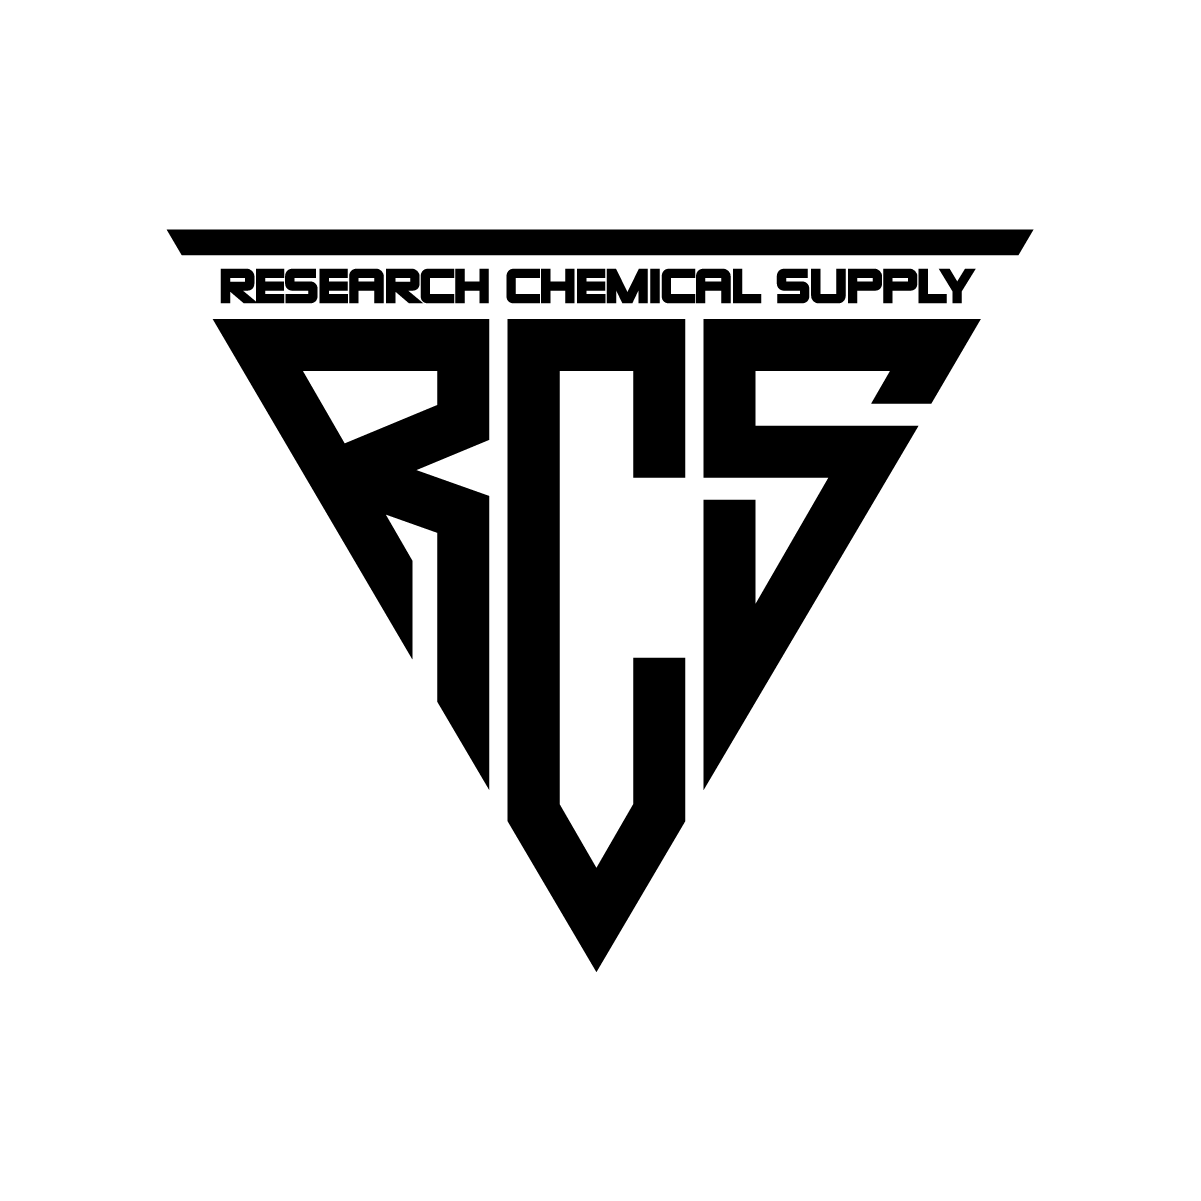 RCS Research – Research Chemical Supply